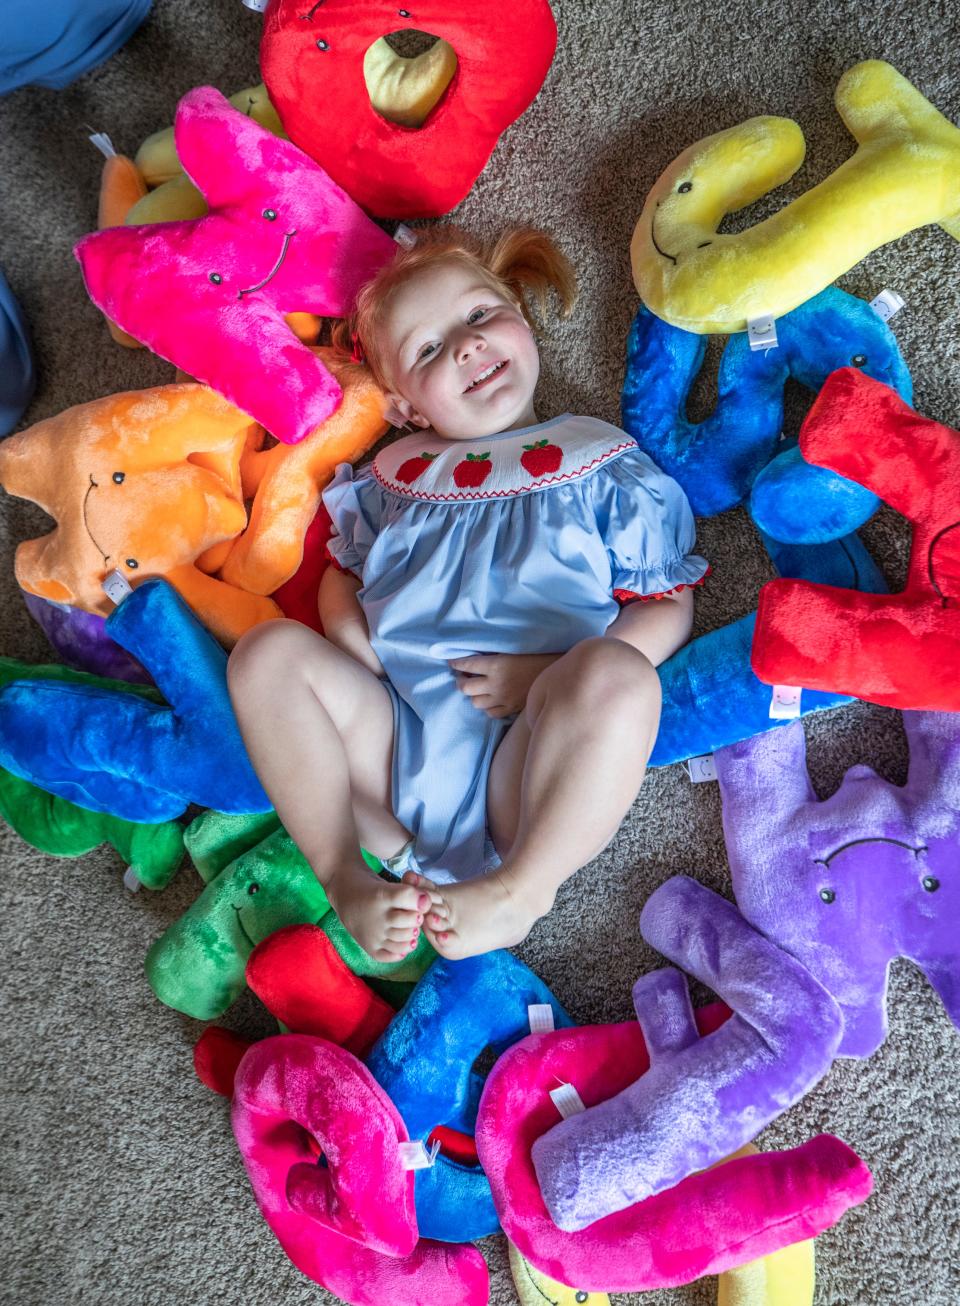 Isla McNabb is a 2-year-old Oldham County, Kentucky resident who was recently accepted as the youngest member of Mensa, the society for people with high IQs. Isla is surrounded on the living room floor with some of her favorite toys -- soft letters of the alphabet. June 13, 2022